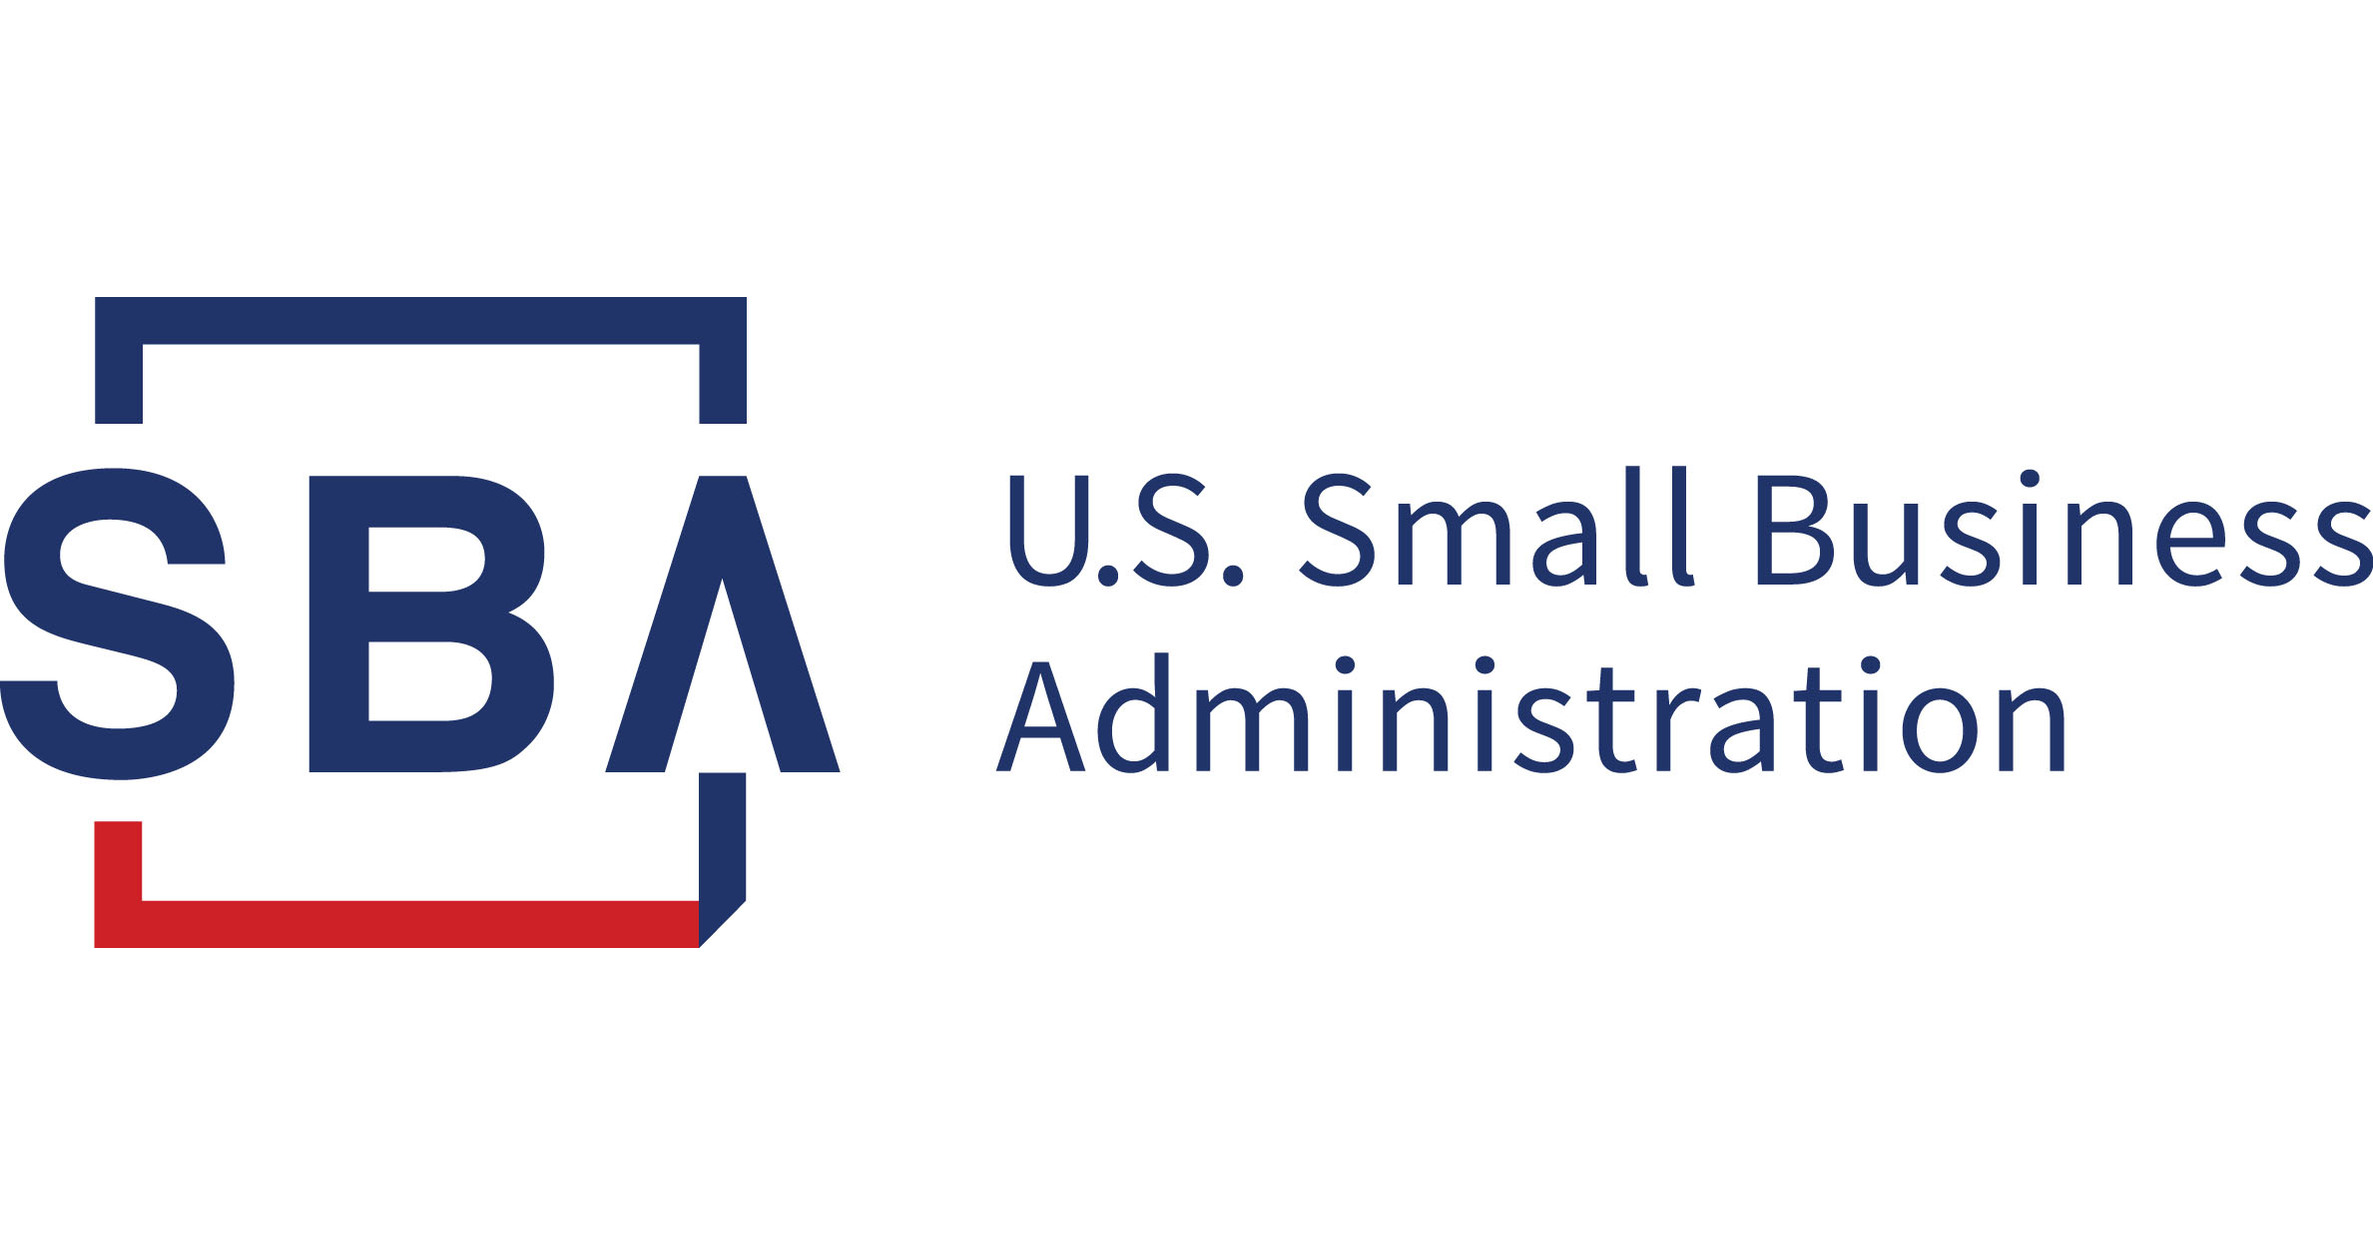 SBA Administrator Guzman Announces the Launch of Inaugural America’s Seed Fund Expo Competition for Small Businesses, Startups and Inventors, using SBIR Developed Technology